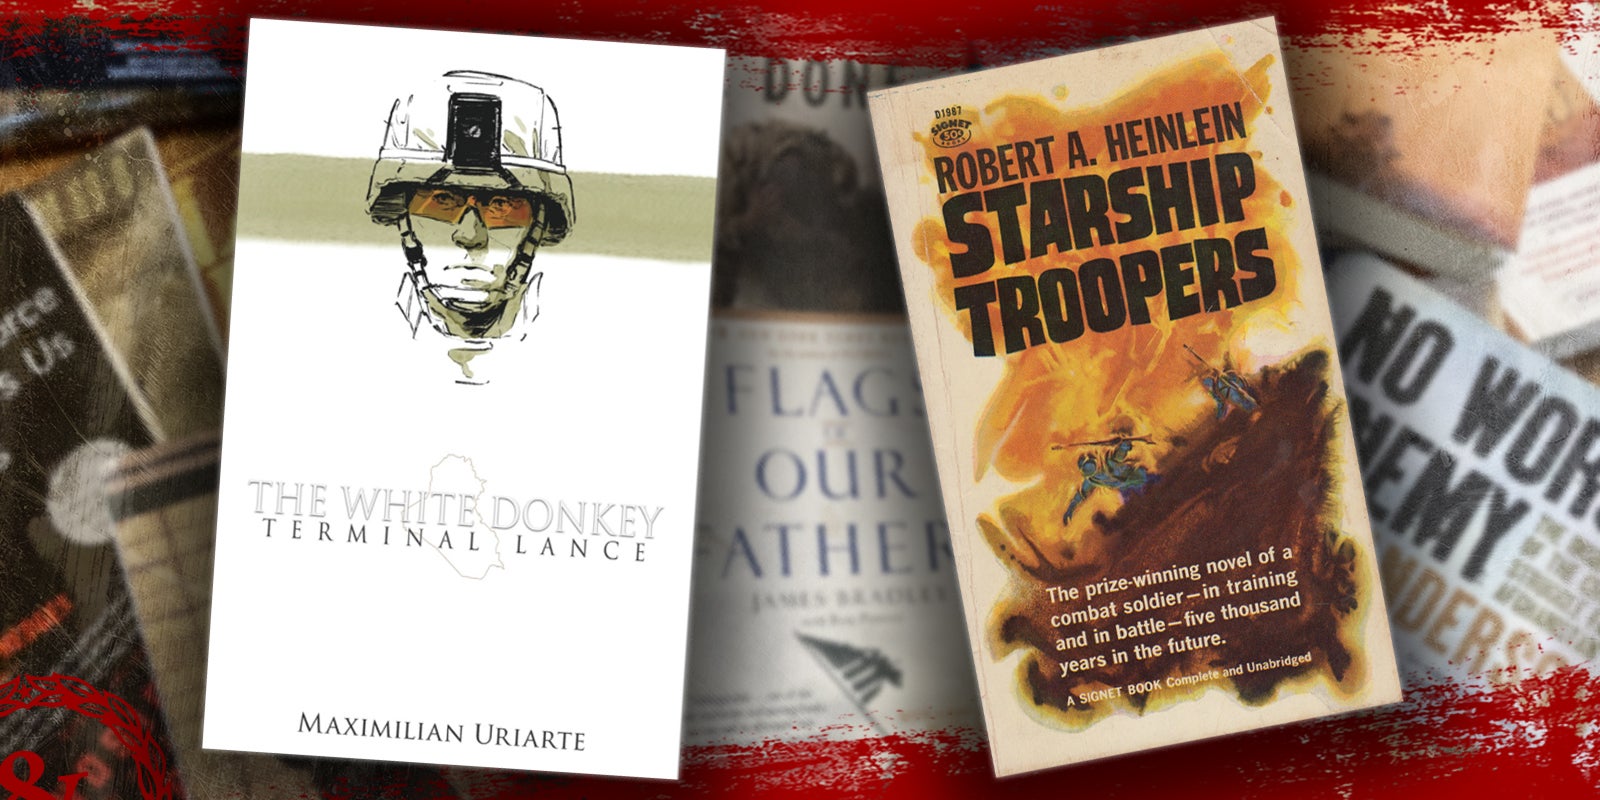 ‘Starship Troopers’ is off the Marine commandant’s reading list, but ‘White Donkey’ by Terminal Lance is in